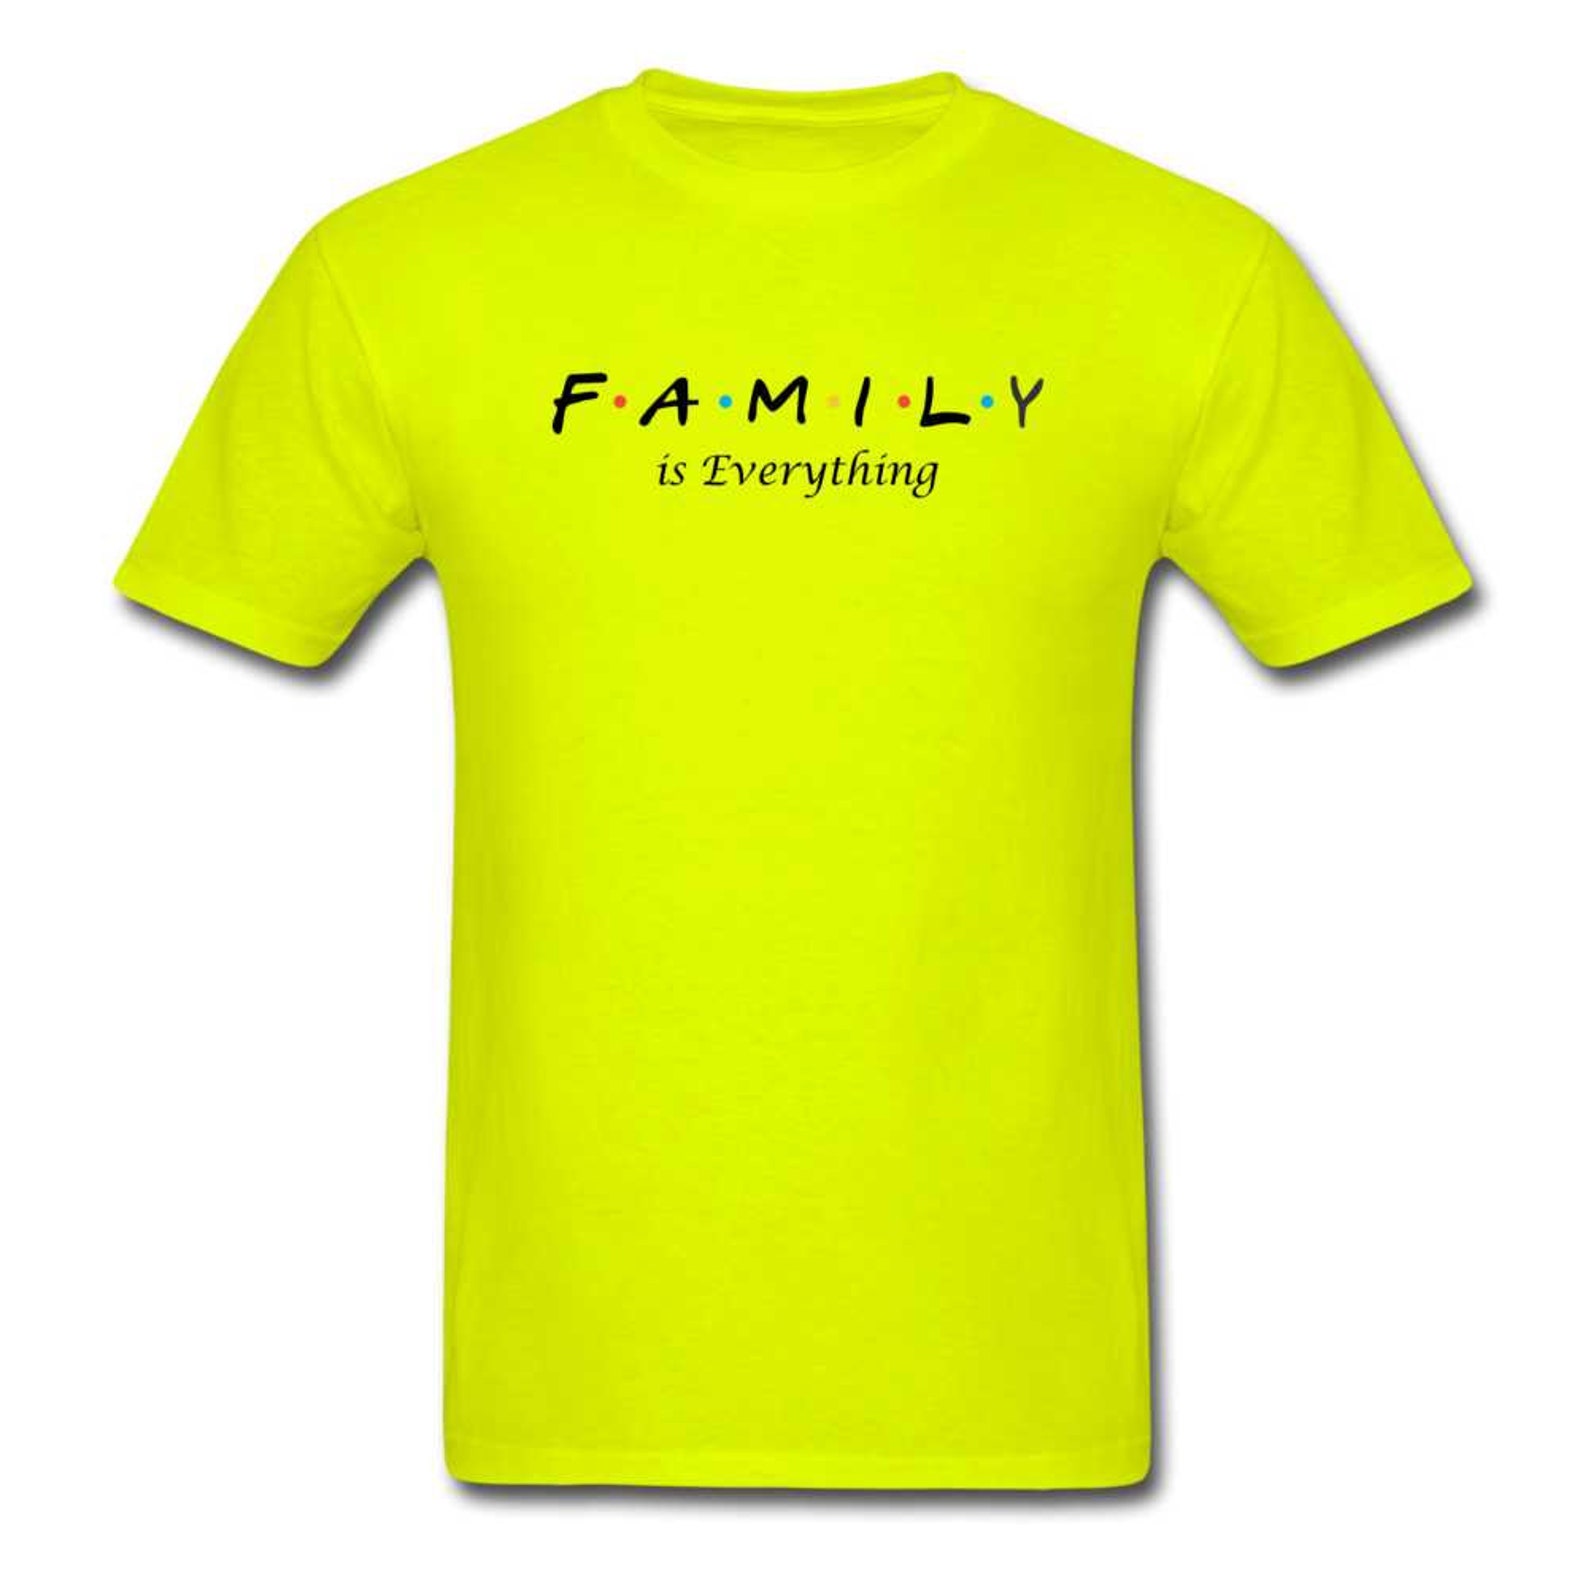 FAMILY IS EVERYTHING Unisex Classic T-Shirt | Etsy